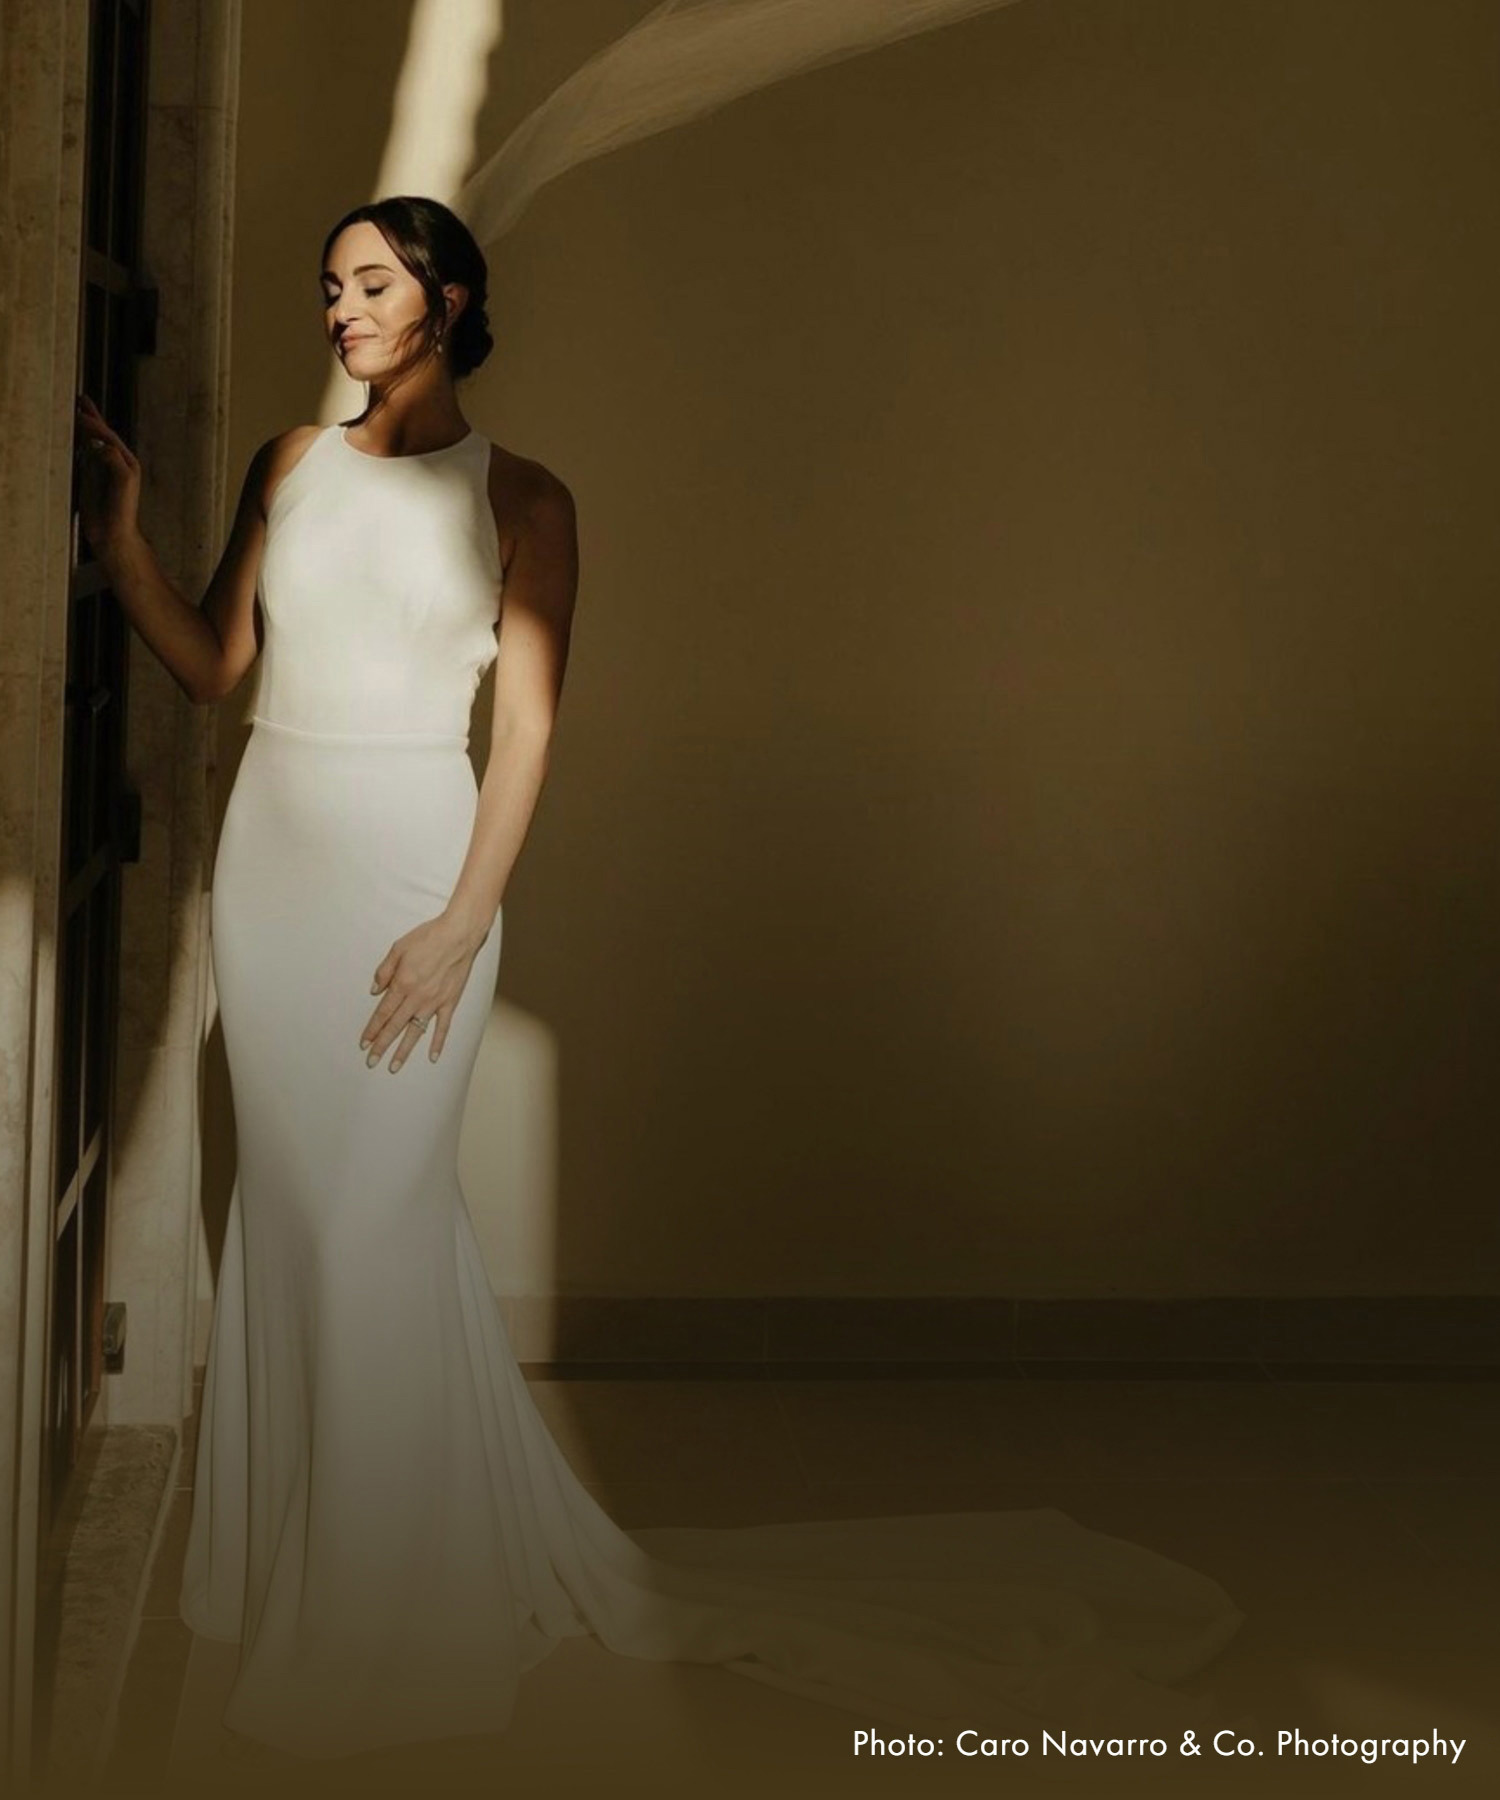 Model wearing a white gown. Mobile image